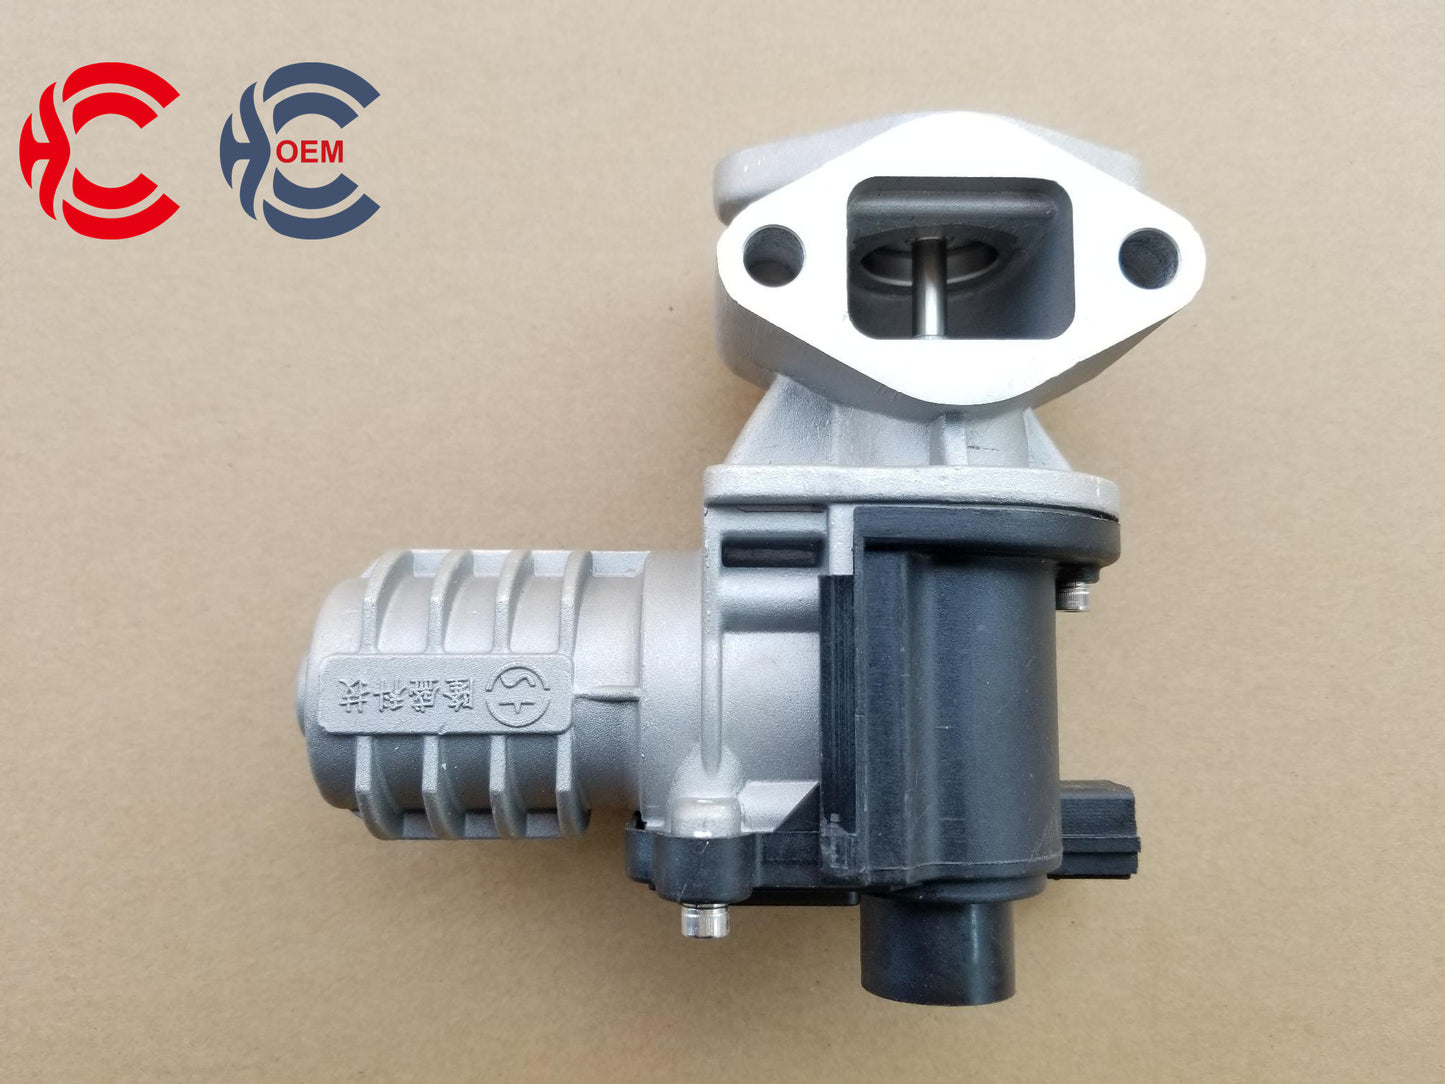 OEM: 1207010-PA11Material: ABS MetalColor: black silver goldenOrigin: Made in ChinaWeight: 1000gPacking List: 1* Exhaust Gas Recirculation Valve More ServiceWe can provide OEM Manufacturing serviceWe can Be your one-step solution for Auto PartsWe can provide technical scheme for you Feel Free to Contact Us, We will get back to you as soon as possible.